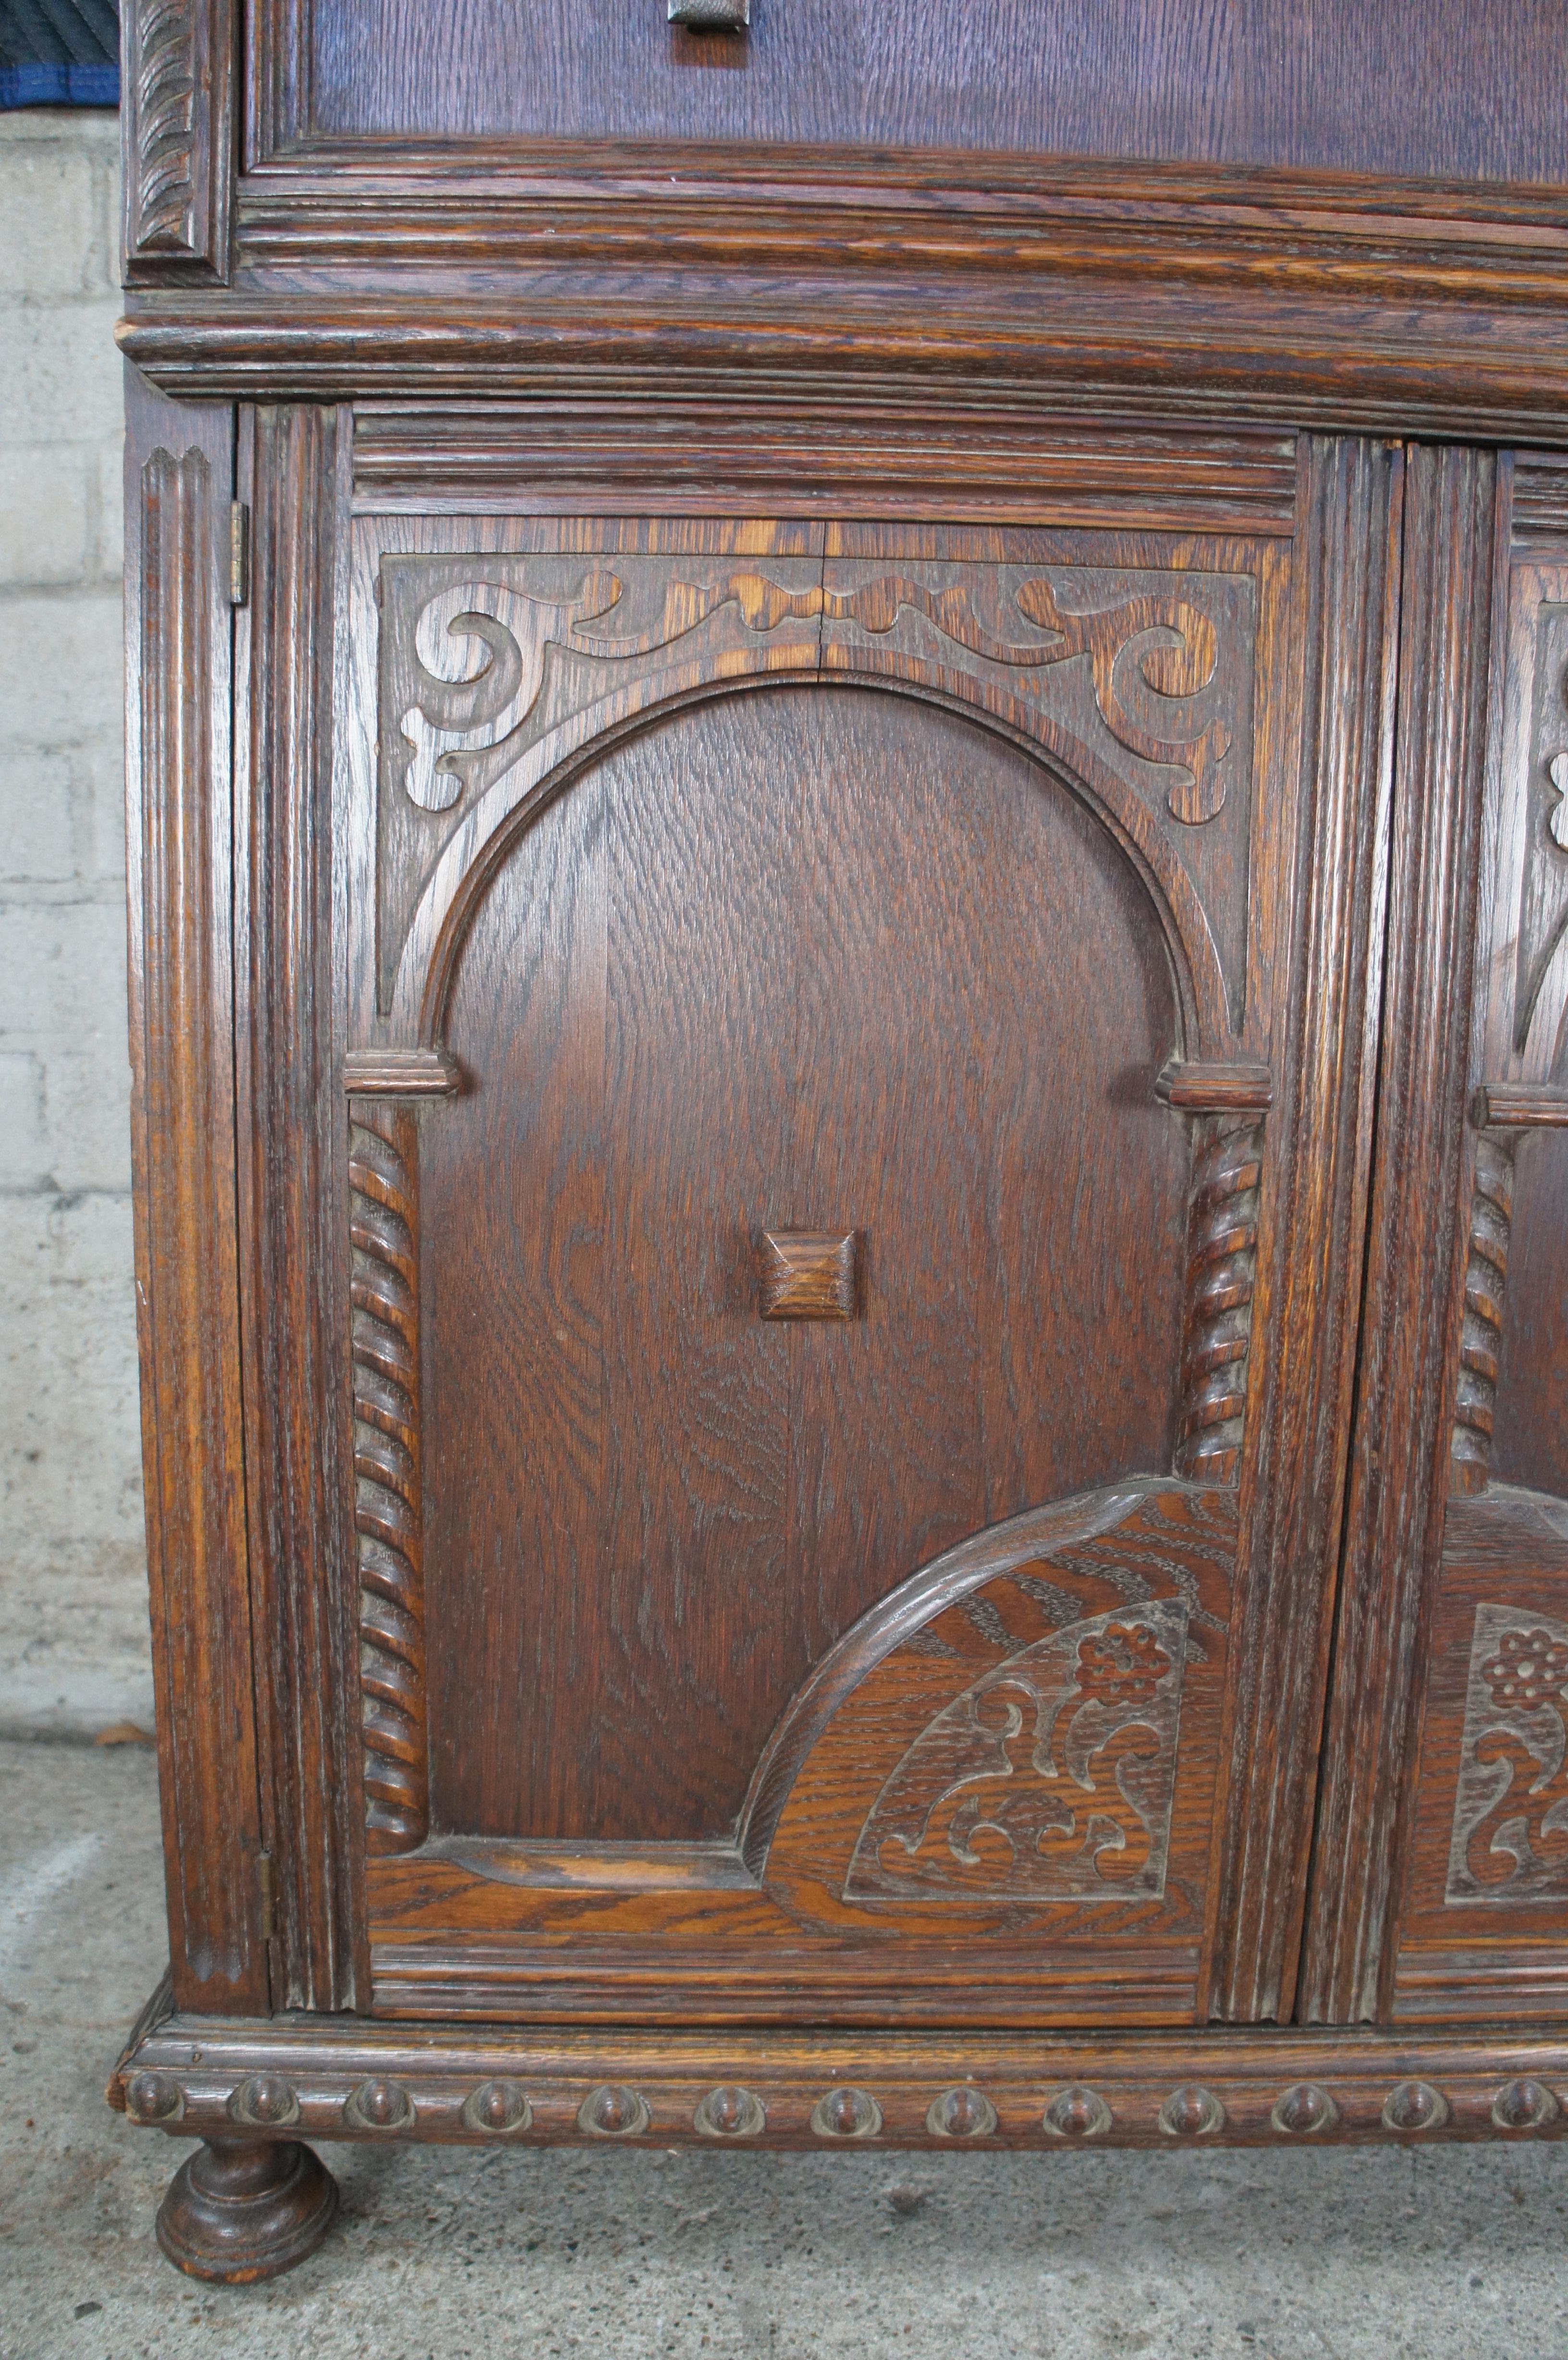 Early 20th Century Antique English Jacobean Style Carved Oak Court Cupboard Hutch Sideboard Dry Bar